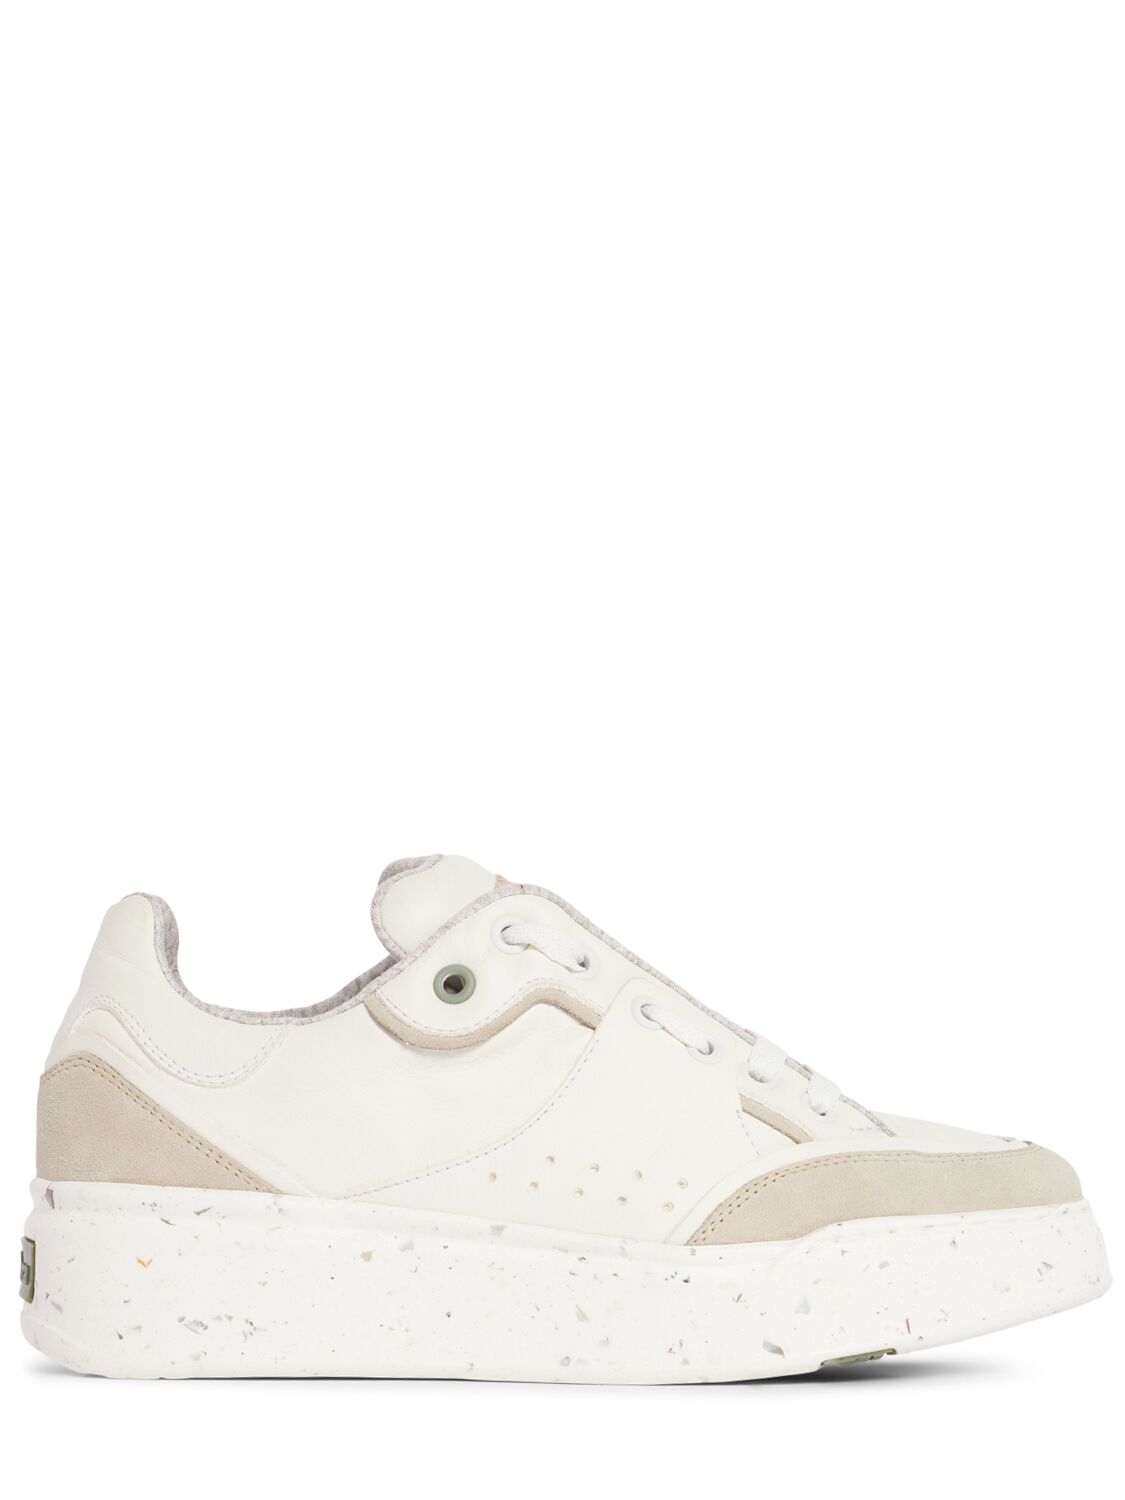 Max Mara Activegreen Leather Trainers In White